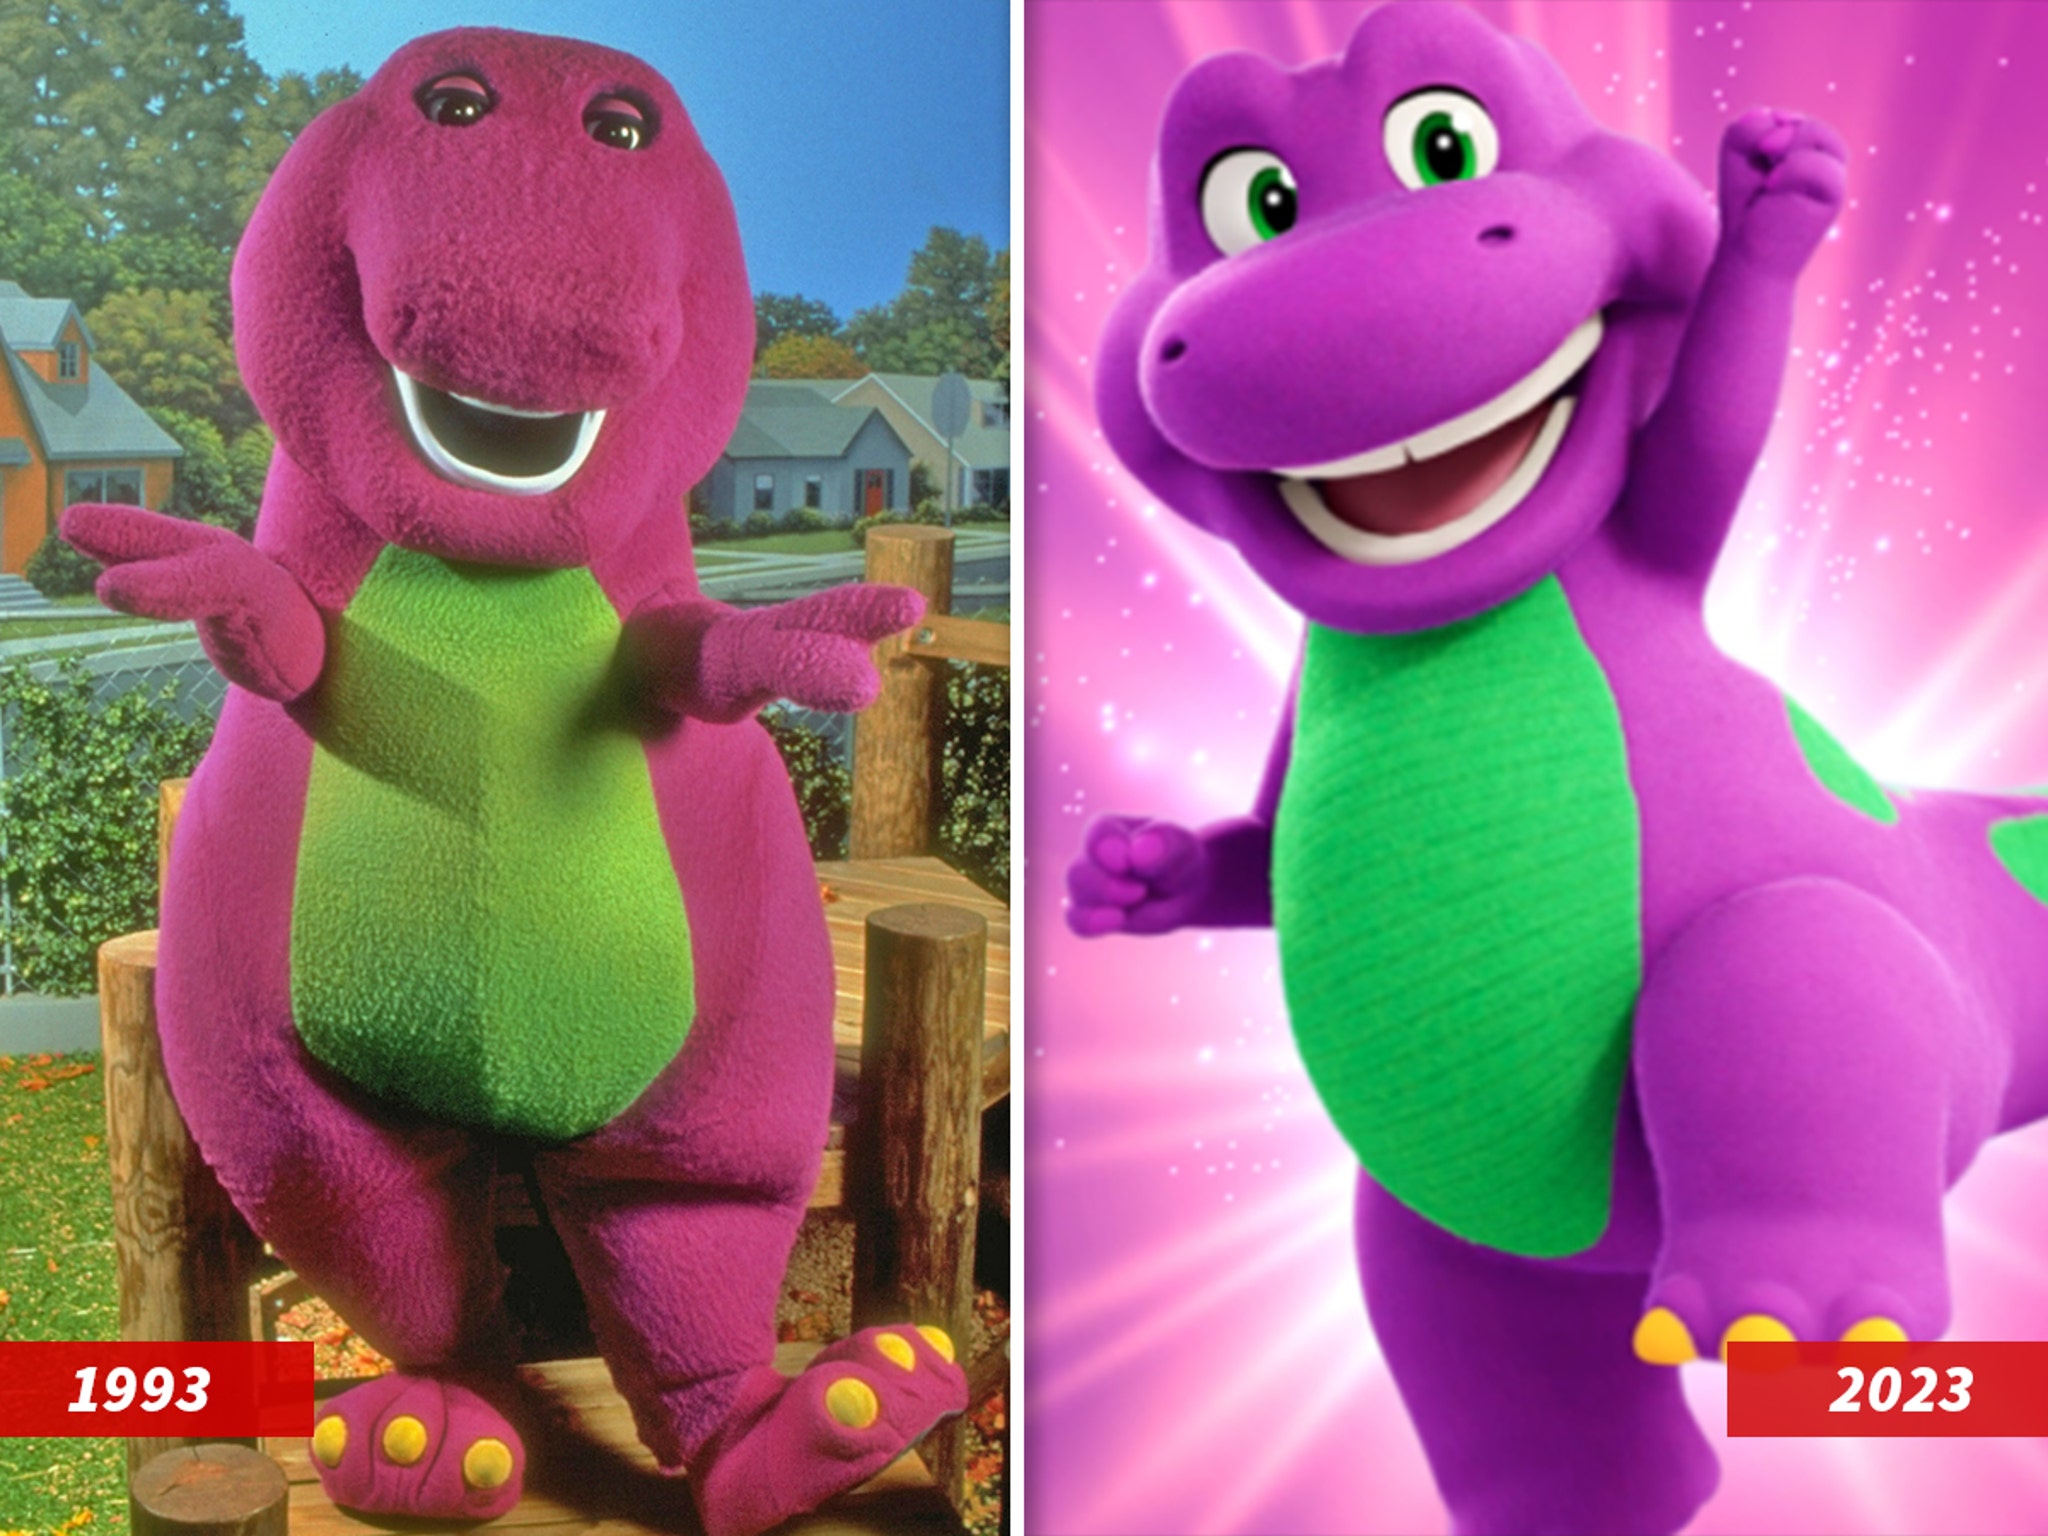 Barney's Original Voice Actor Bob West Likes the Controversial New Look